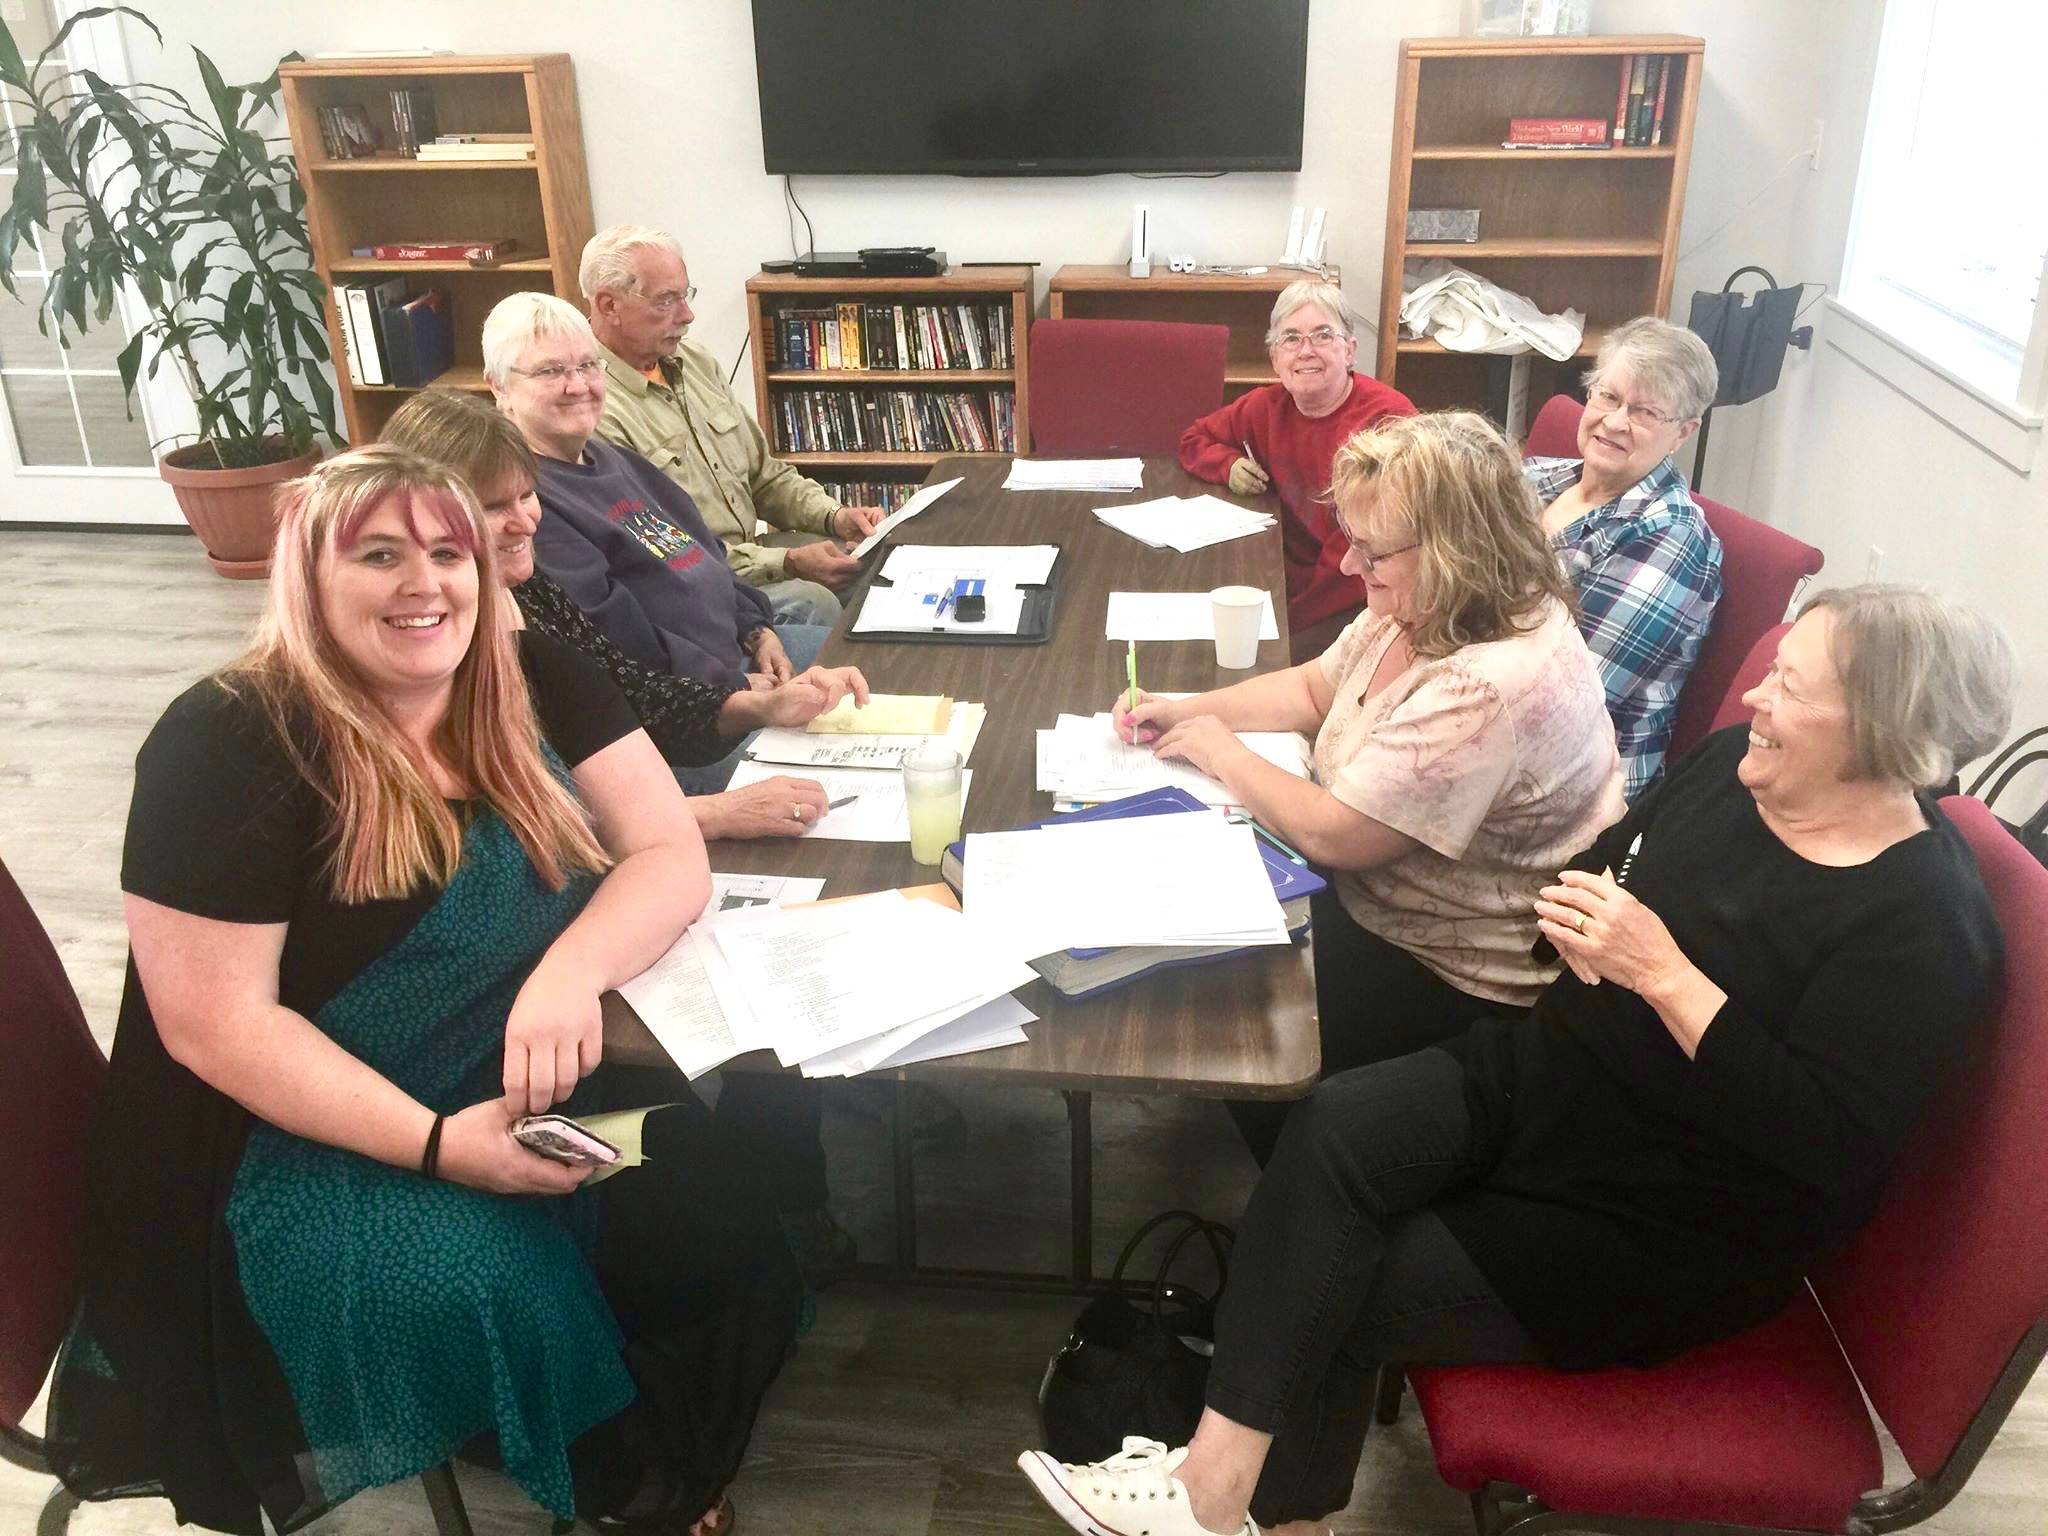 Sterling Area Senior Citizens Inc. board members and volunteers Kristie Bass, Lynn Near, Dee Duvall, Dale Lundell, Linda Bond, Sandy Bailey, Janet Jones and Jacquie Turpin met to discuss plans for the Sterling Street Fair at the Sterling Senior Center in Sterling, Alaska, on Monday, Aug. 13, 2018. (Photo by Victoria Petersen/Peninsula Clarion)